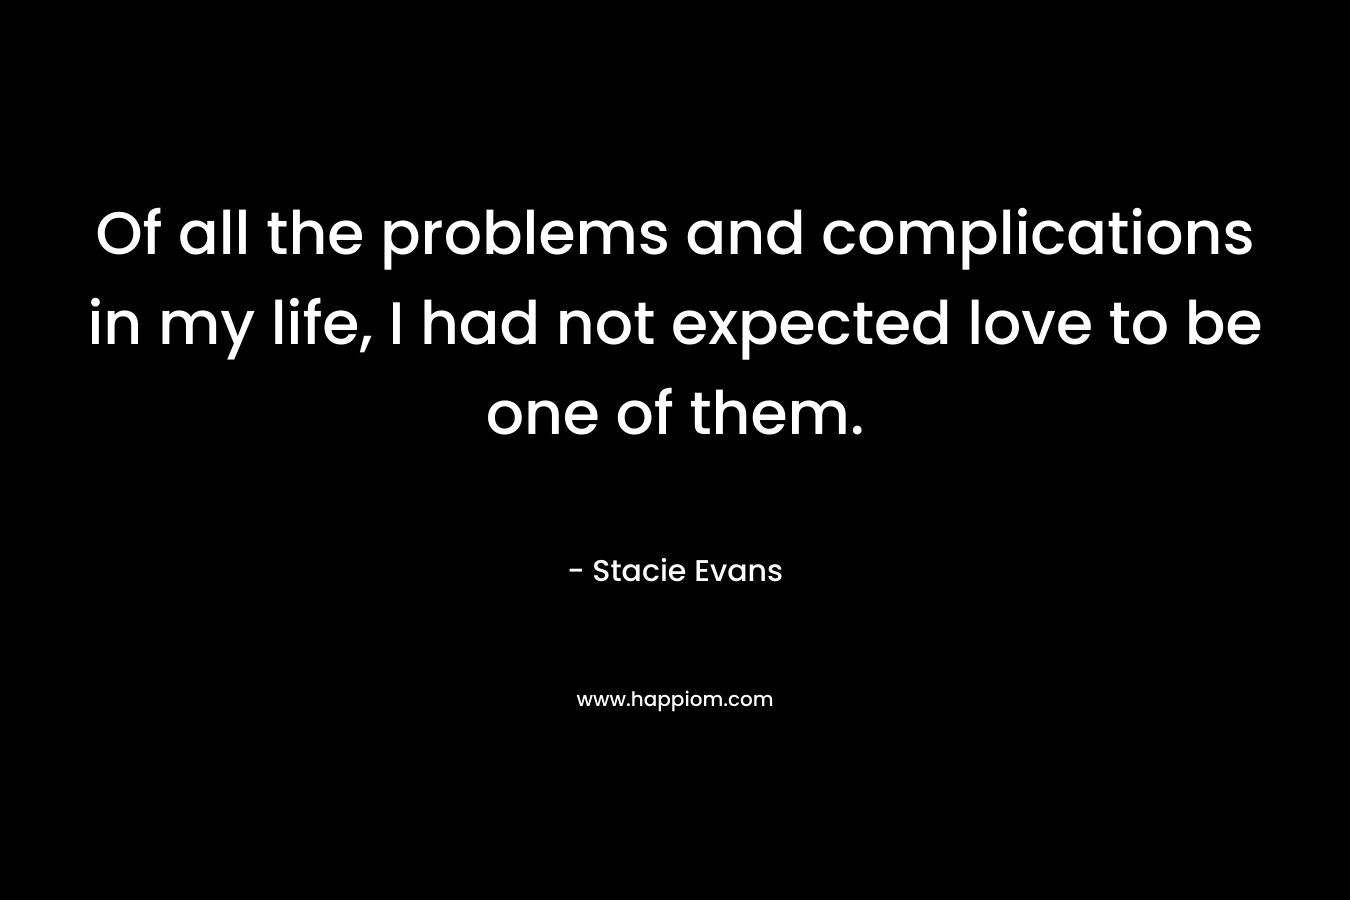 Of all the problems and complications in my life, I had not expected love to be one of them. – Stacie Evans